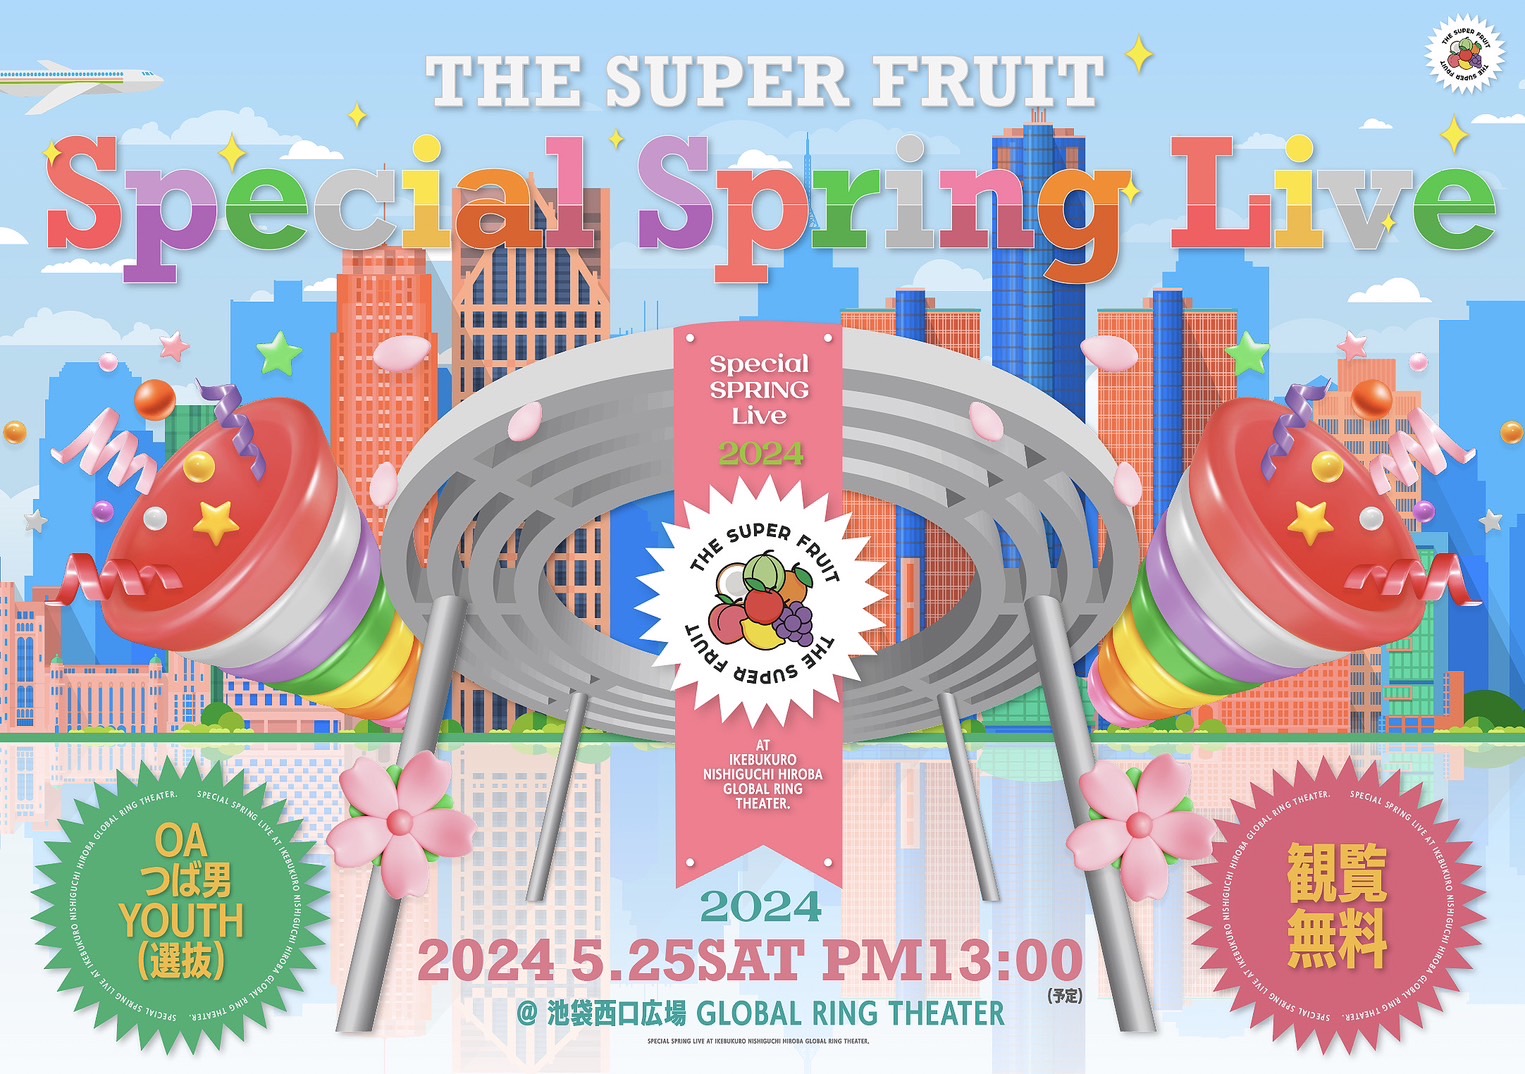 【NEWS】 5月25日(土)「THE SUPER FRUIT Special Spring Live」 ＠池袋西口公園野外劇場グローバルリング シアター(東京）にて開催決定！！(2024年4月24日更新)